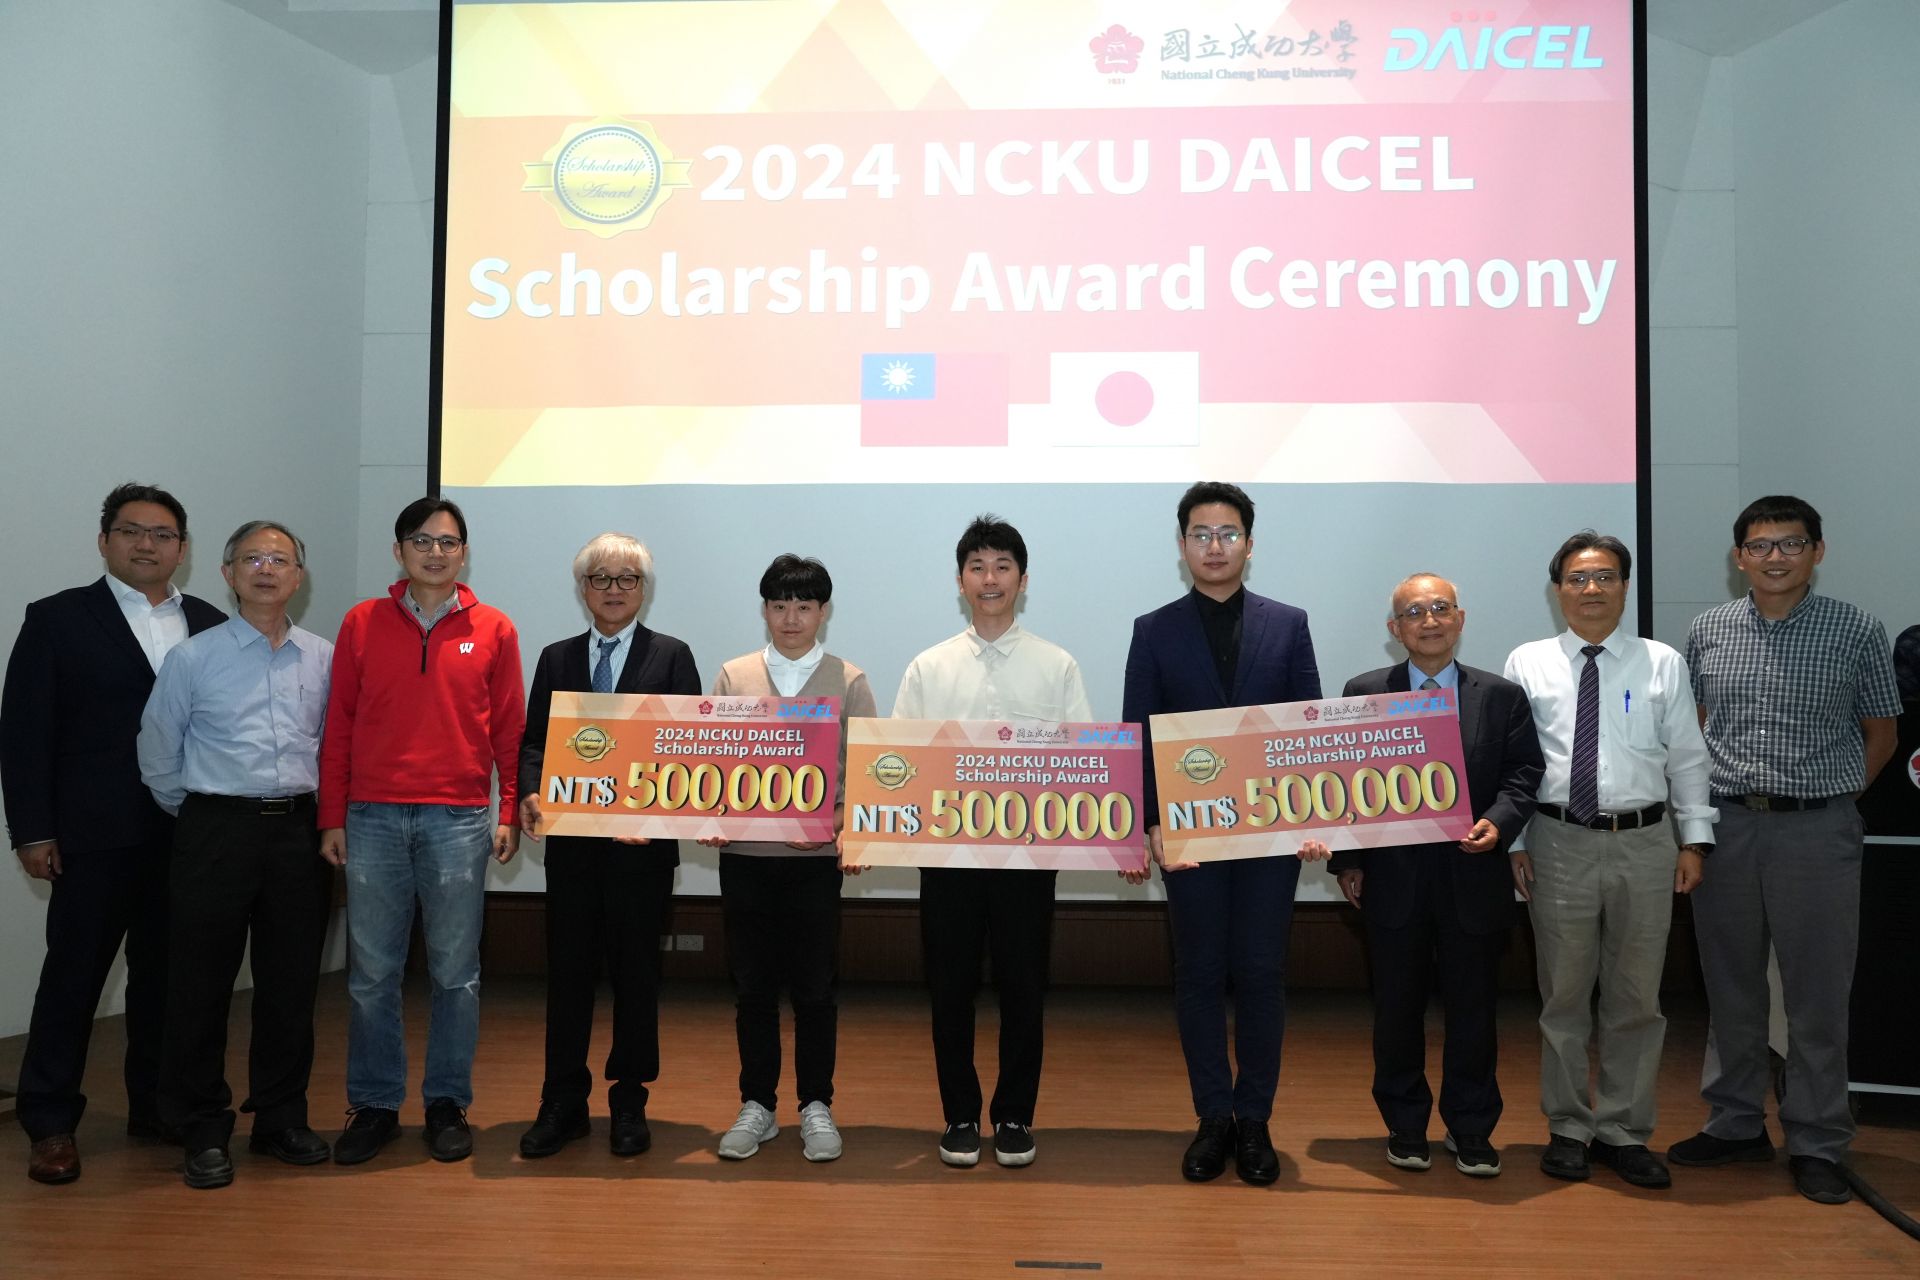 DAICEL offers inaugural scholarships in partnership with NCKU to cultivate top R&D talents.